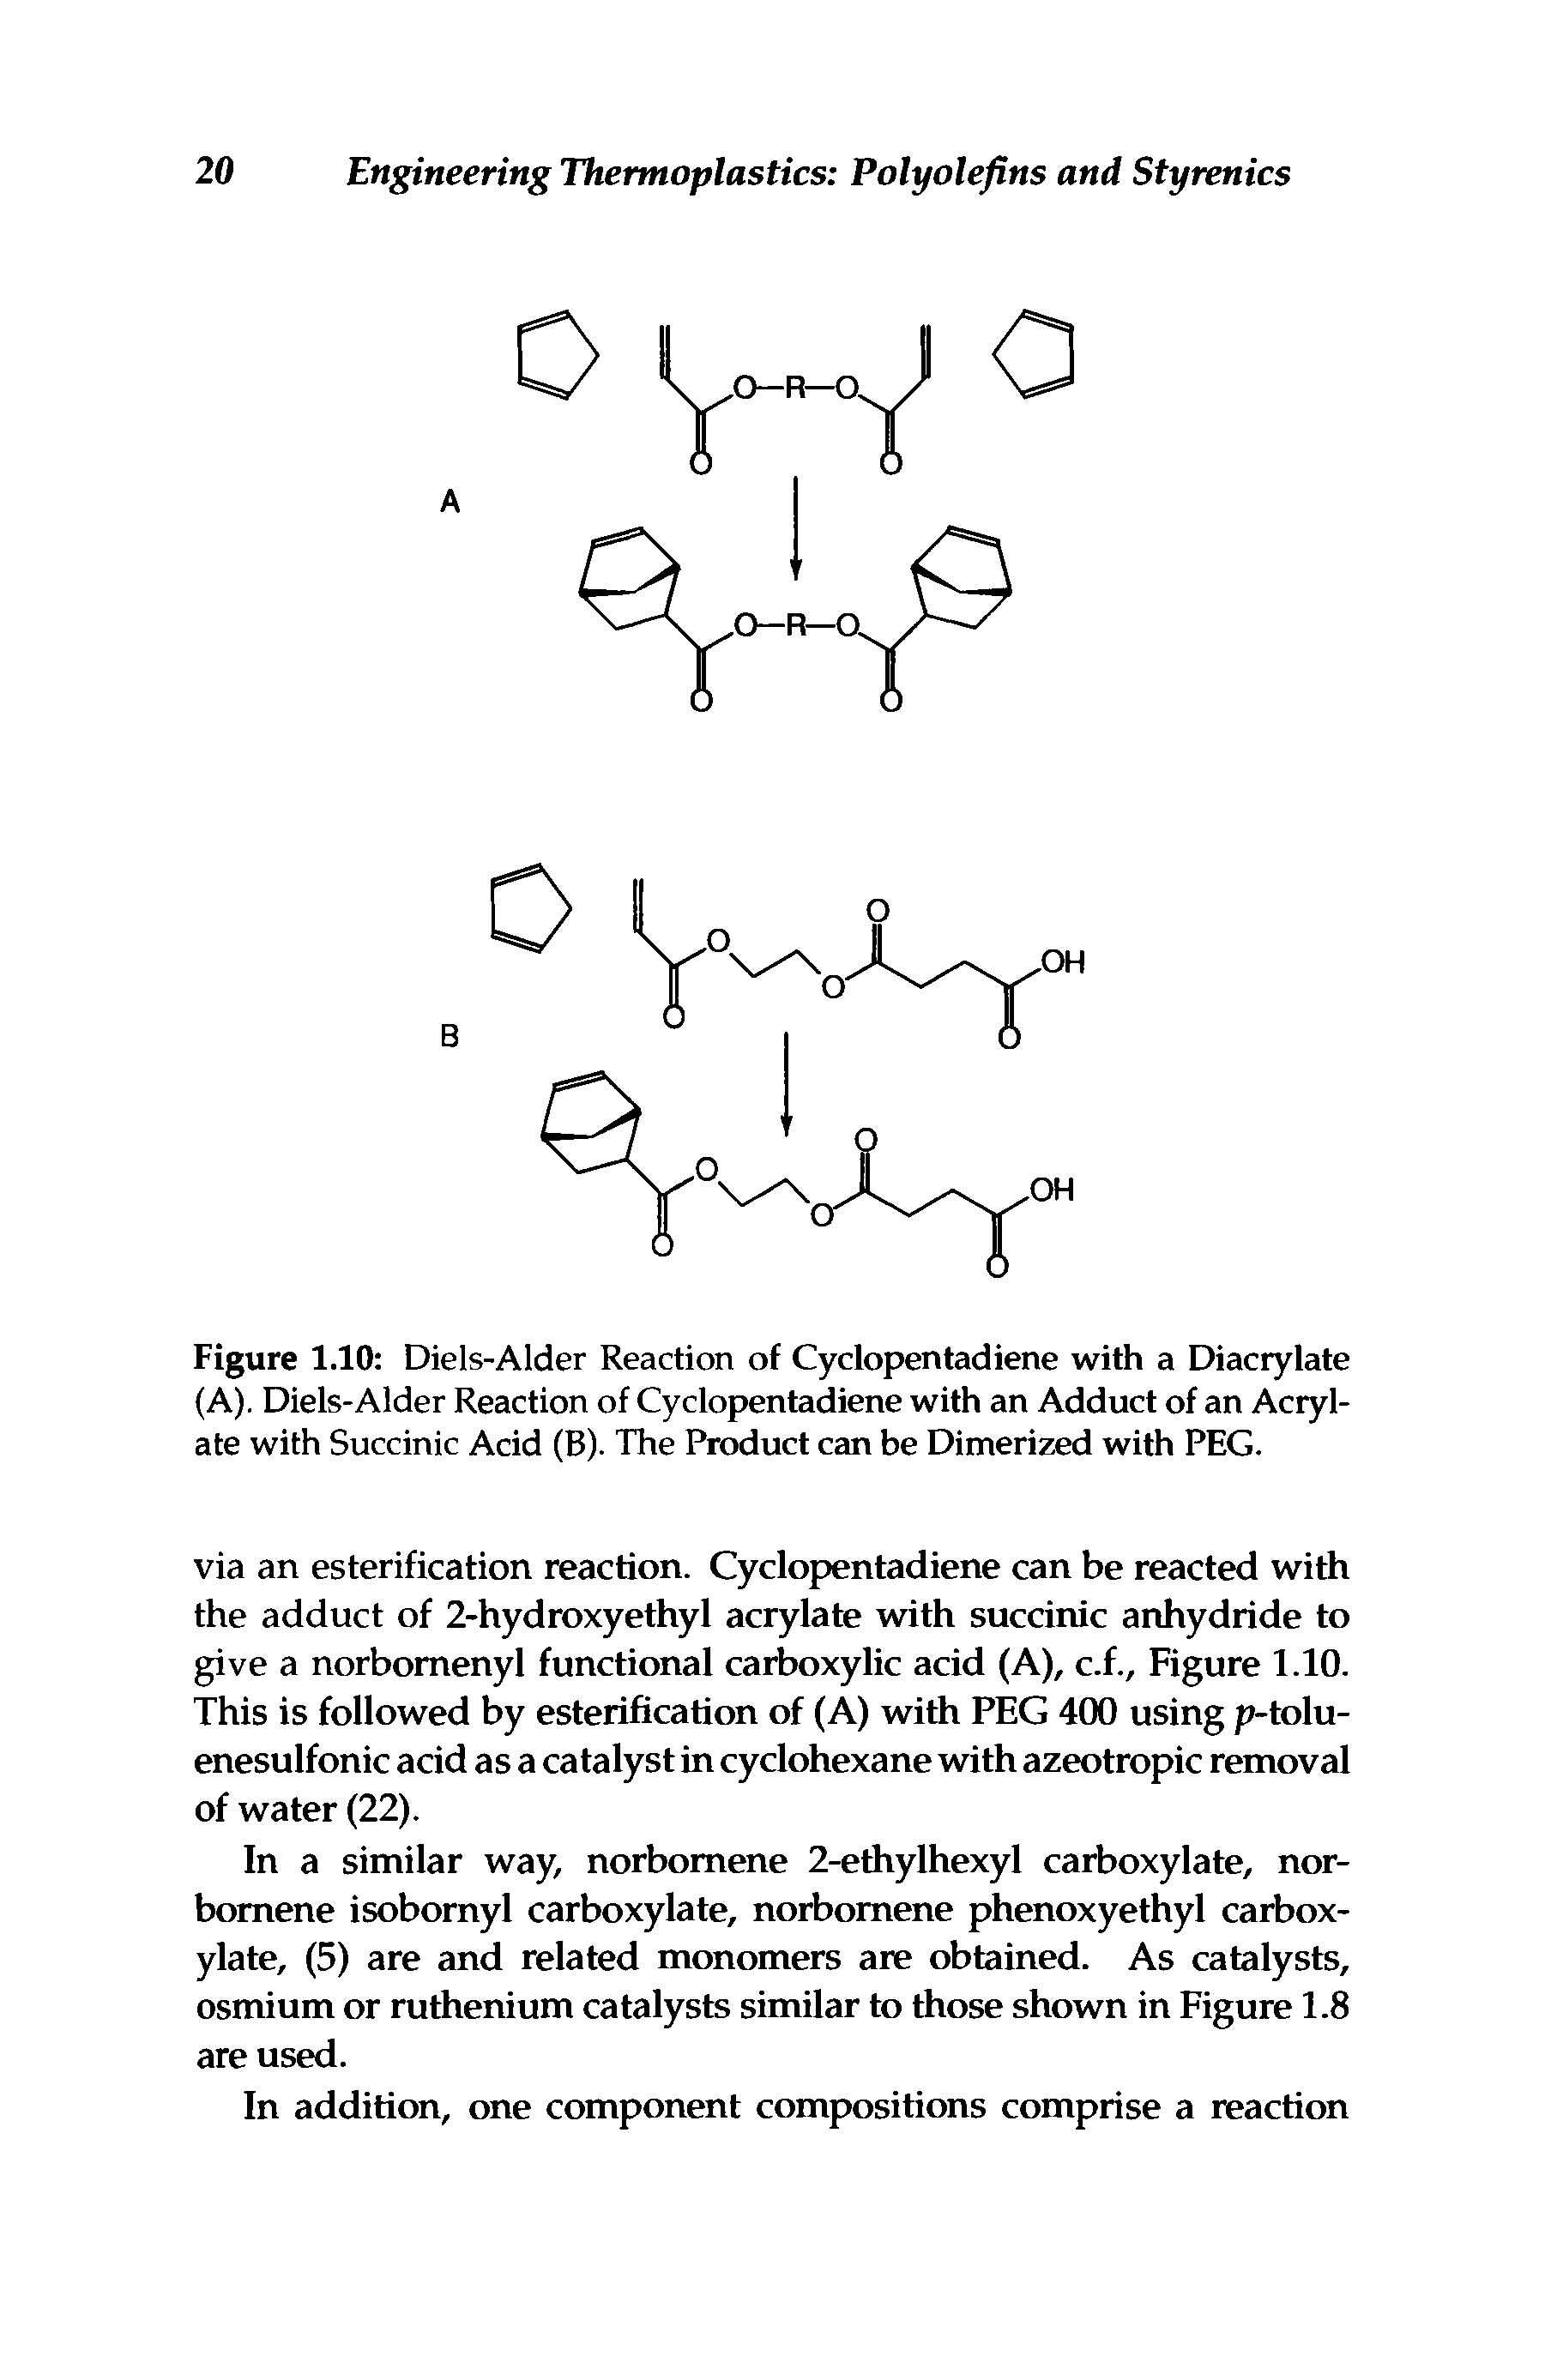 Figure 1.10 Diels-Alder Reaction of Cyclopentadiene with a Diacrylate (A). Diels-Alder Reaction of Cyclopentadiene with an Adduct of an Acrylate with Succinic Acid (B). The Product can be Dimerized with PEG.